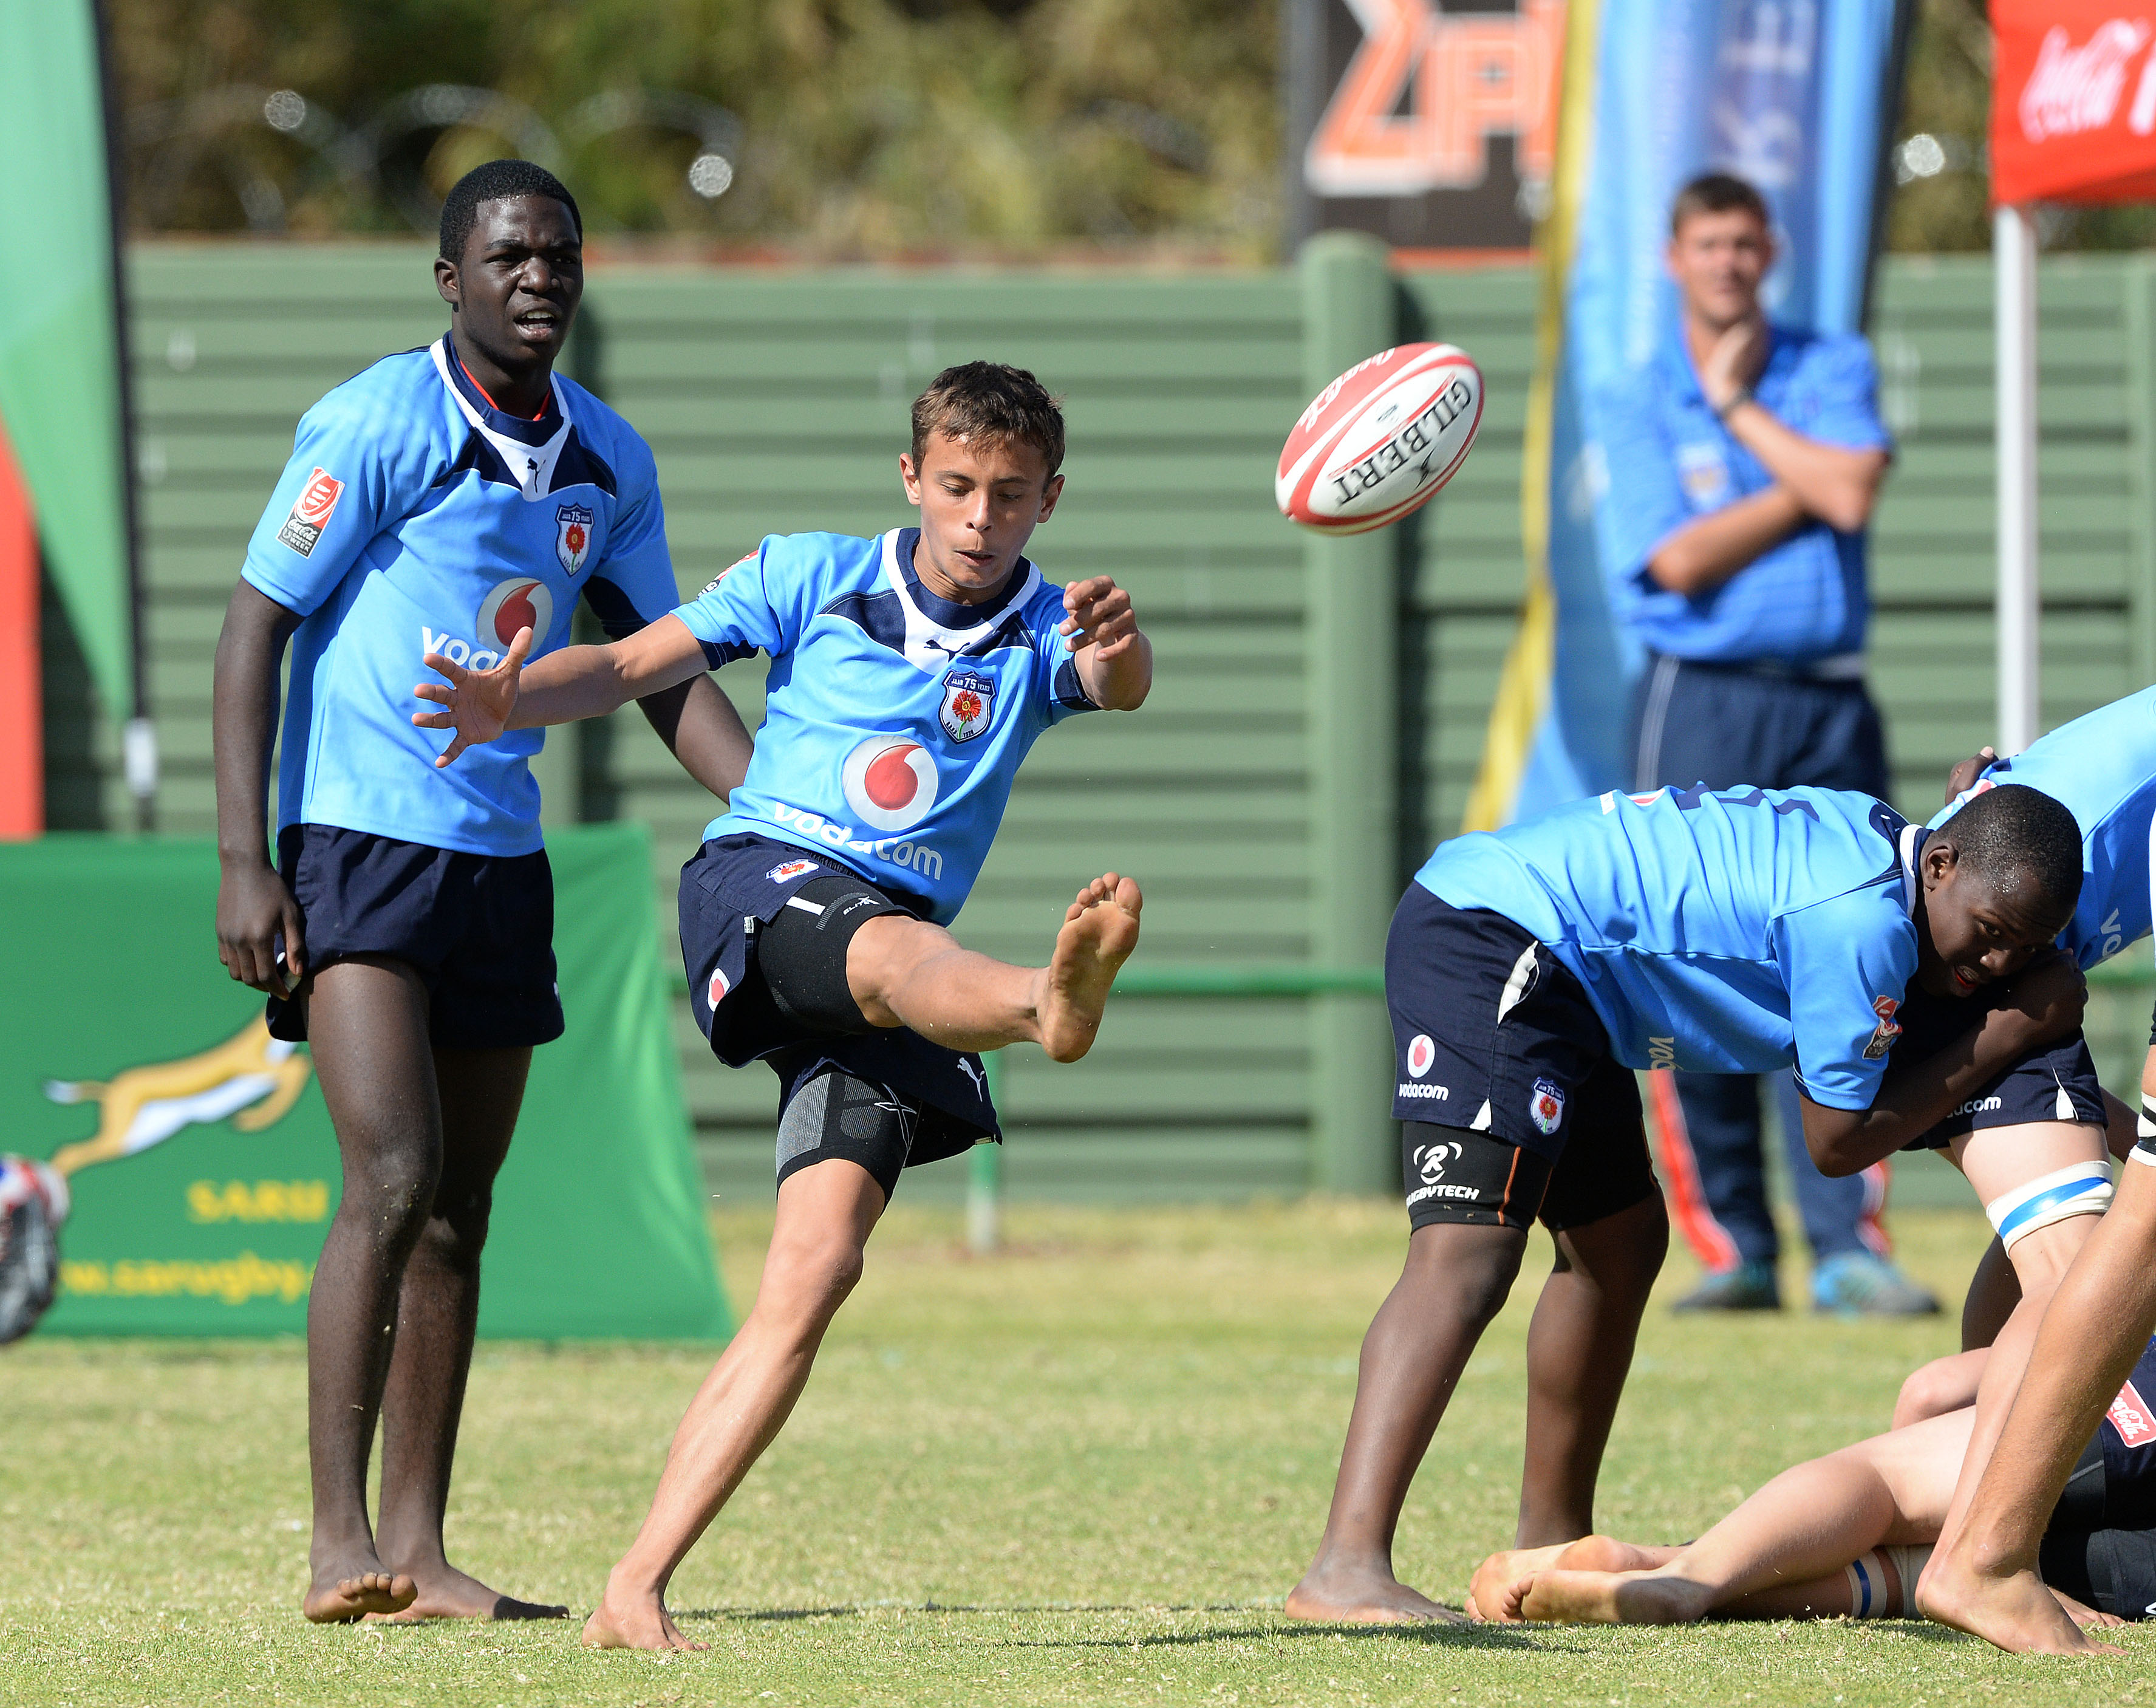 Coca Cola U/13 Craven Week Day 3 15.co.za  Rugby News, Live Scores, Results, Fixtures